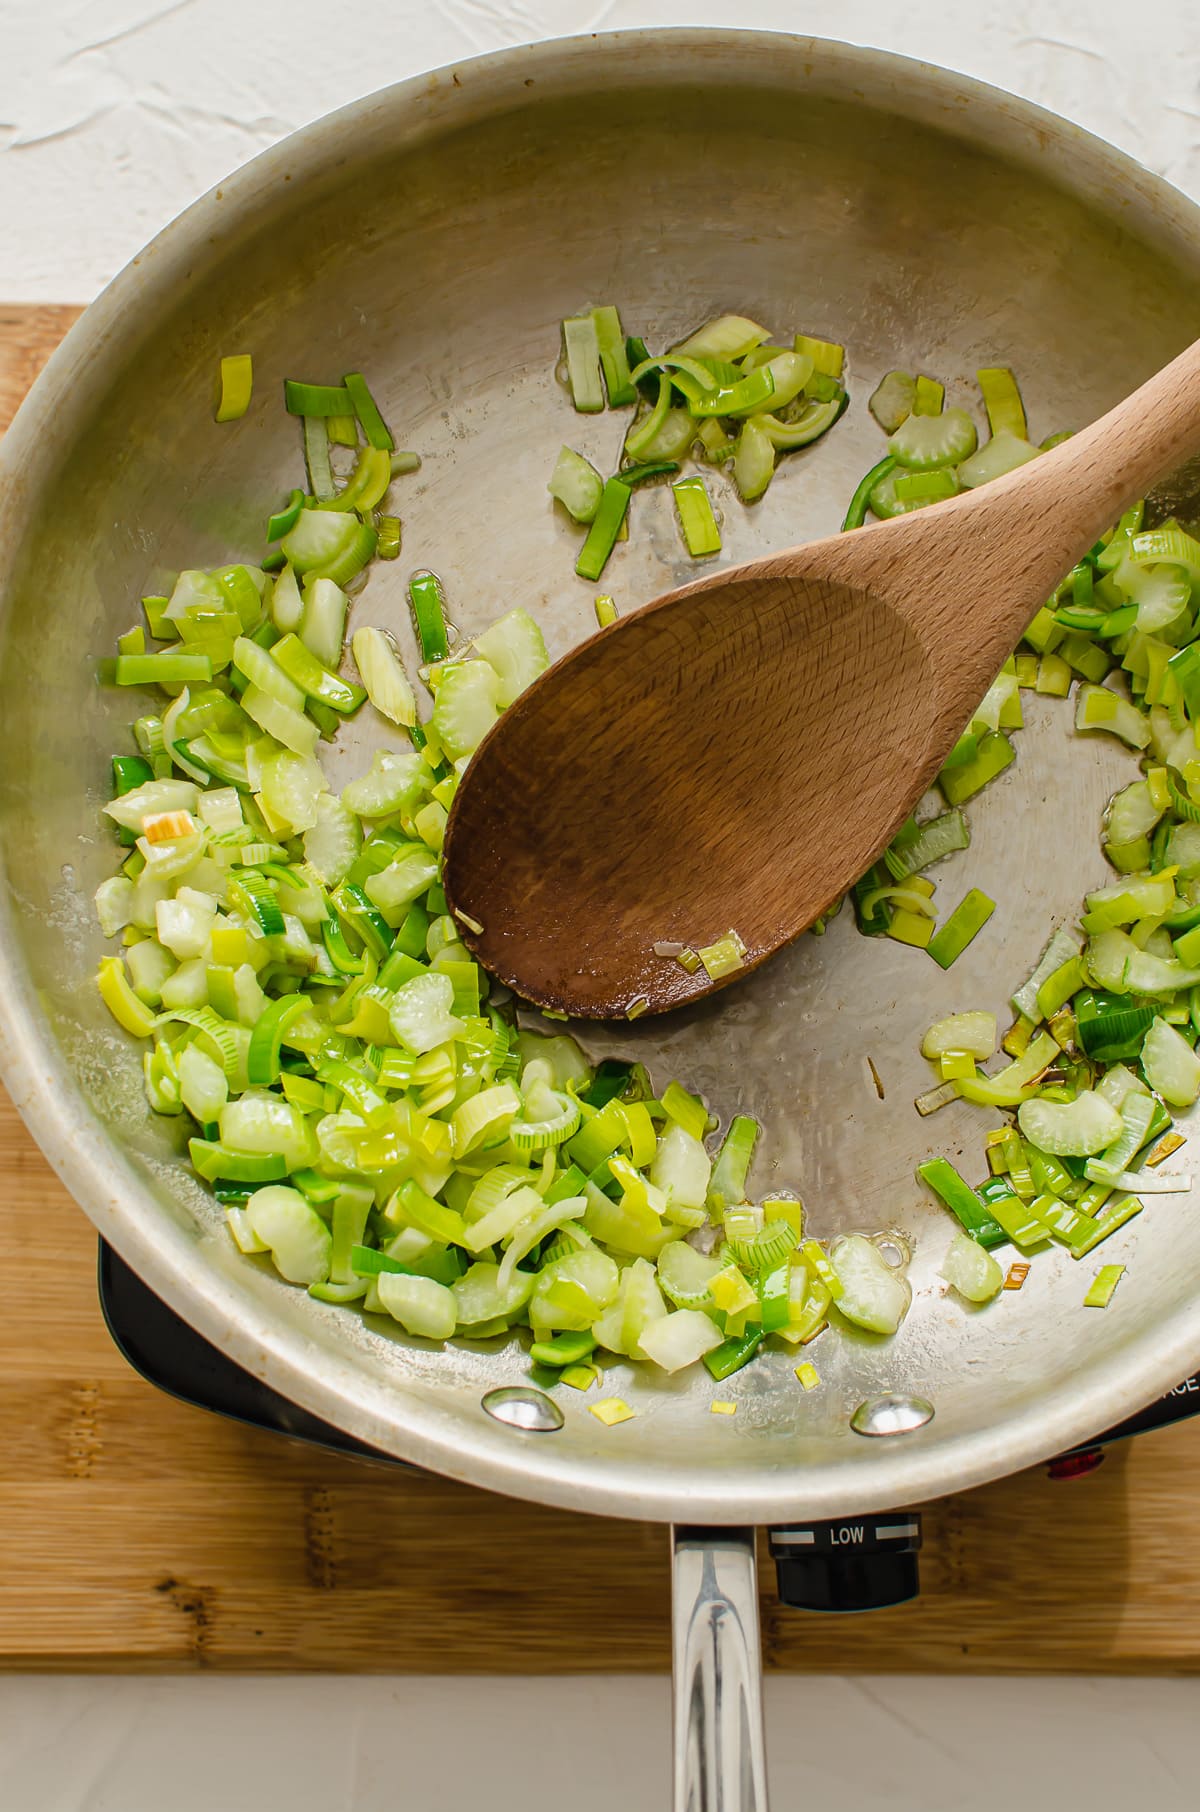 Sauteed leeks and garlic in a skillet.